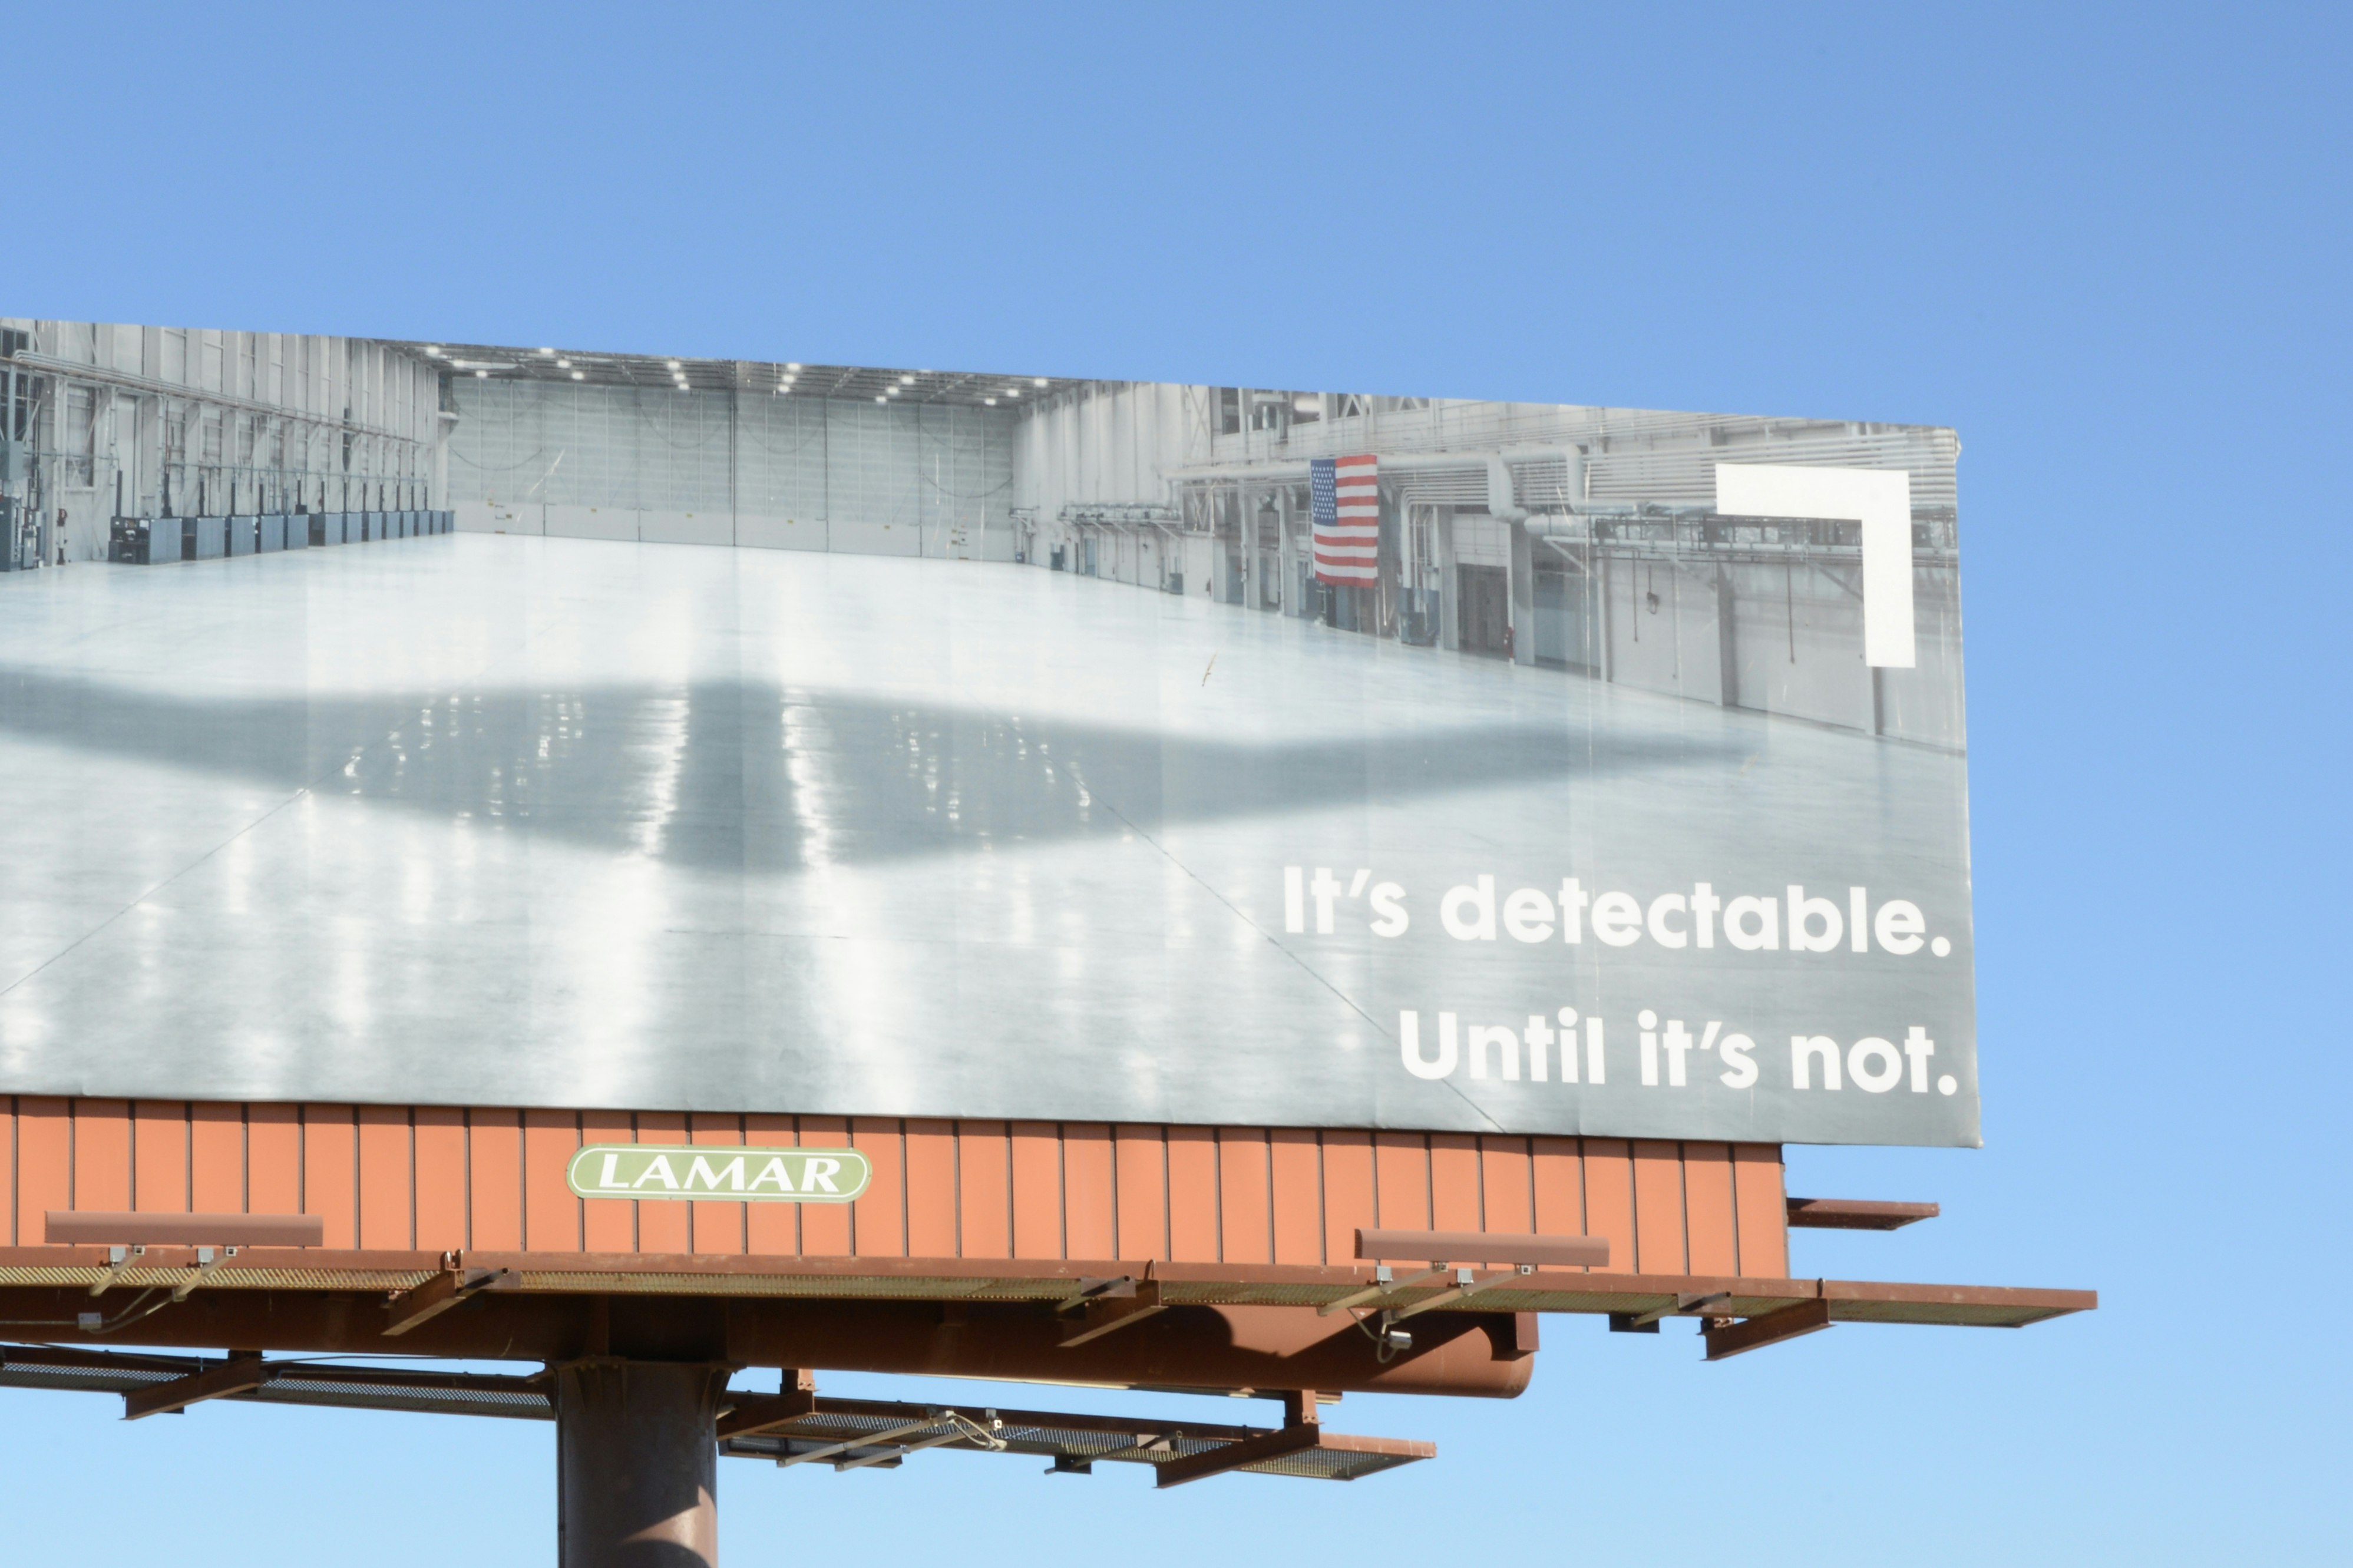 Billboard showing hangar interior with shadow of stealth aircraft cast on the floor. Text: “It’s detectable. Until it’s not.”